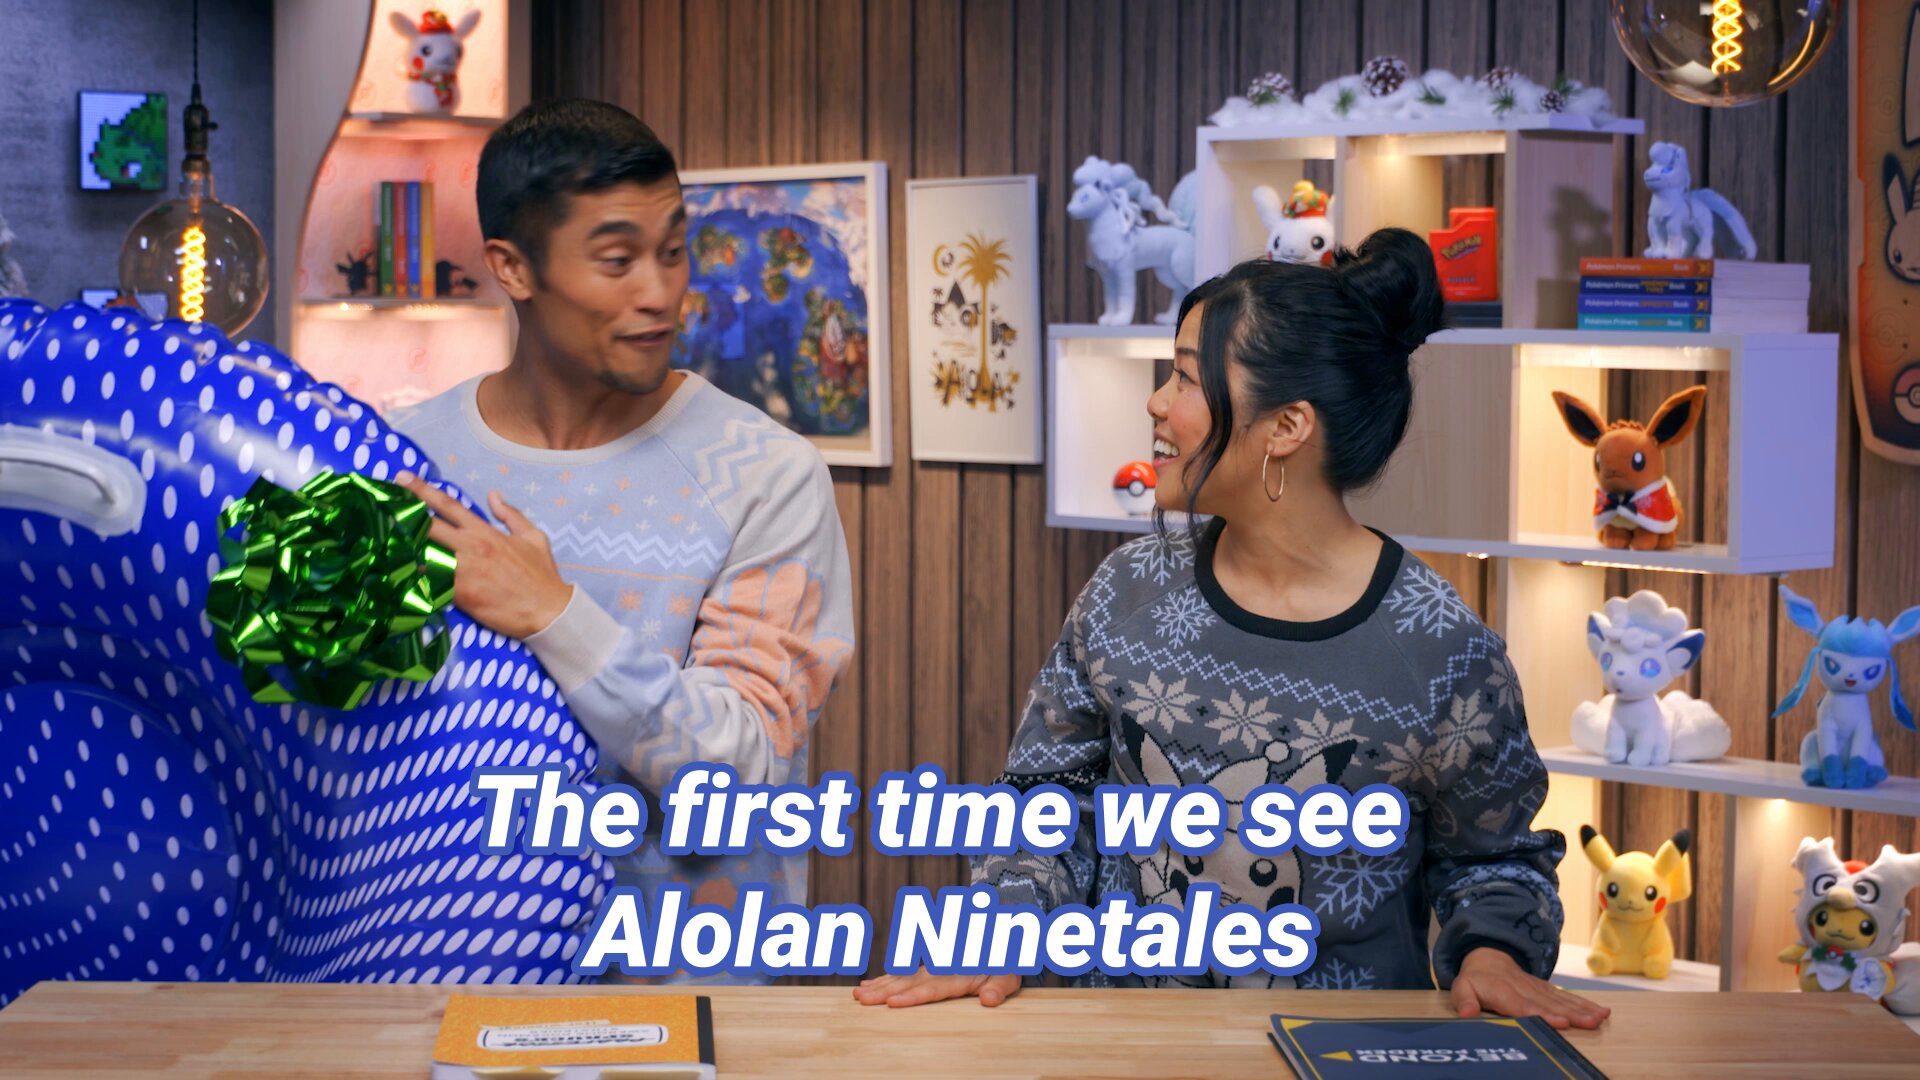 Learn All About Alolan Ninetales in a New Episode of Beyond the